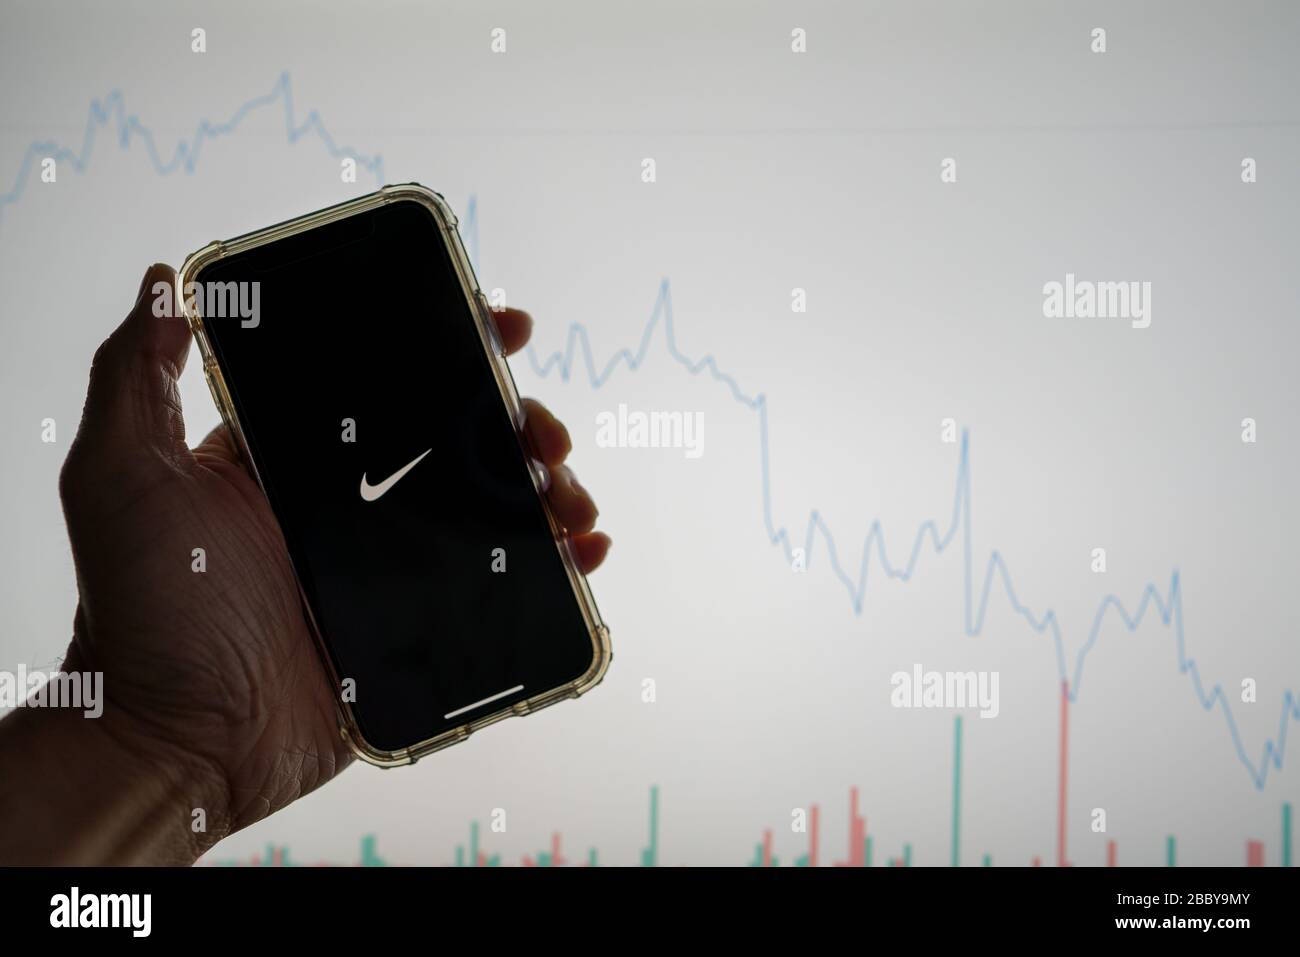 Nike mobile app logo on iPhone in of white stock market chart with graph going down in value Stock Photo Alamy